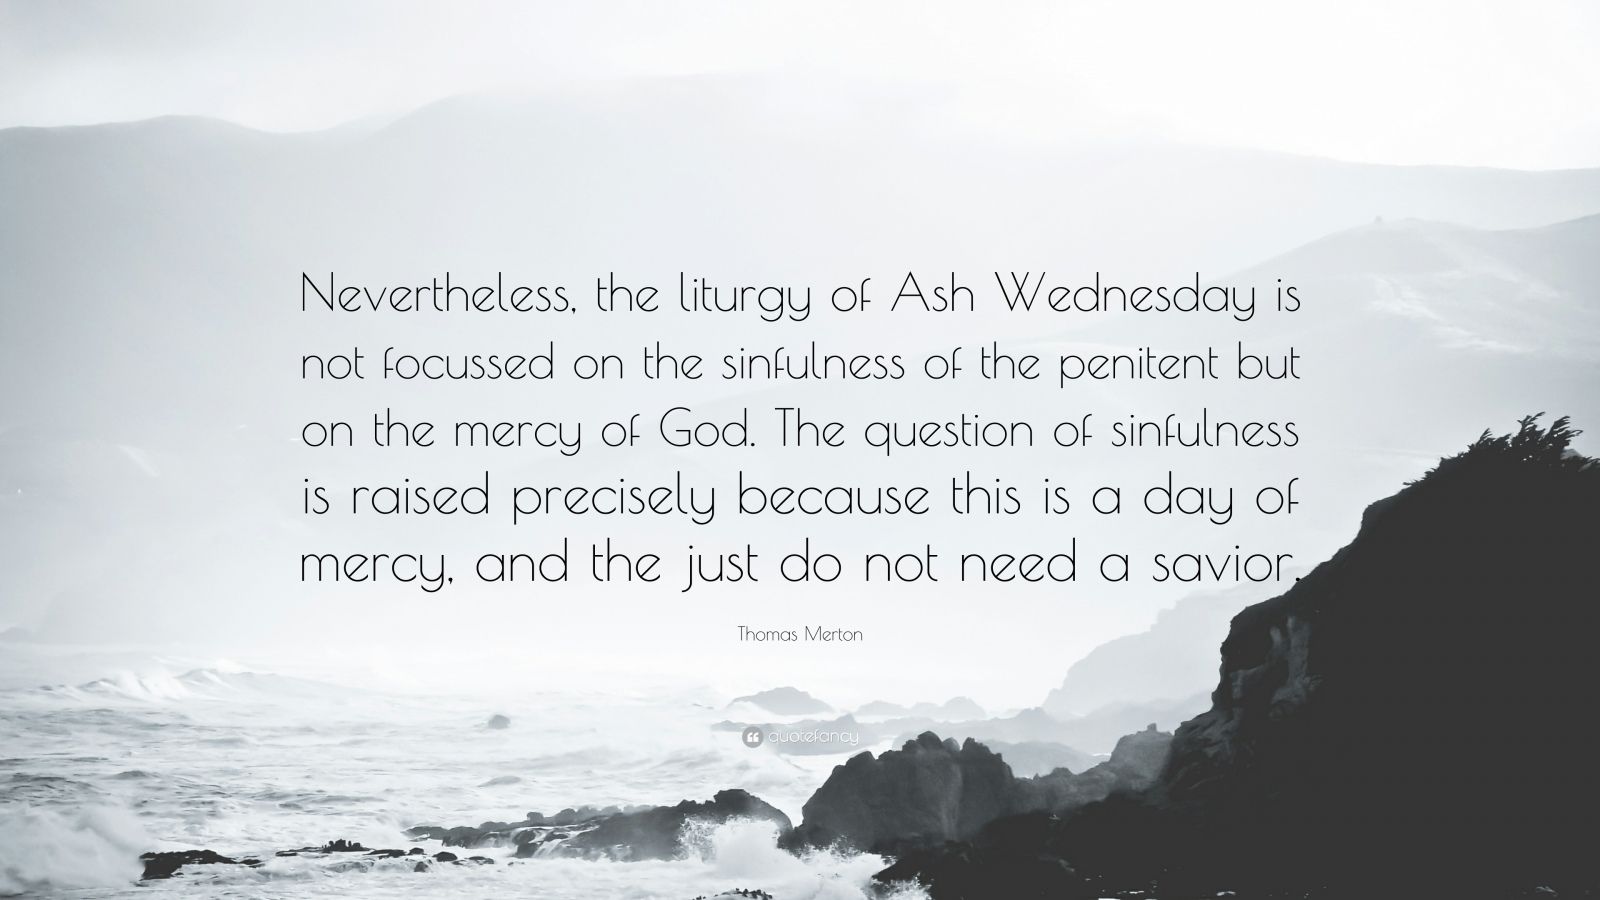 Thomas Merton Quote: “Nevertheless, the liturgy of Ash Wednesday is not  focussed on the sinfulness of the penitent but on the mercy of God. Th...”